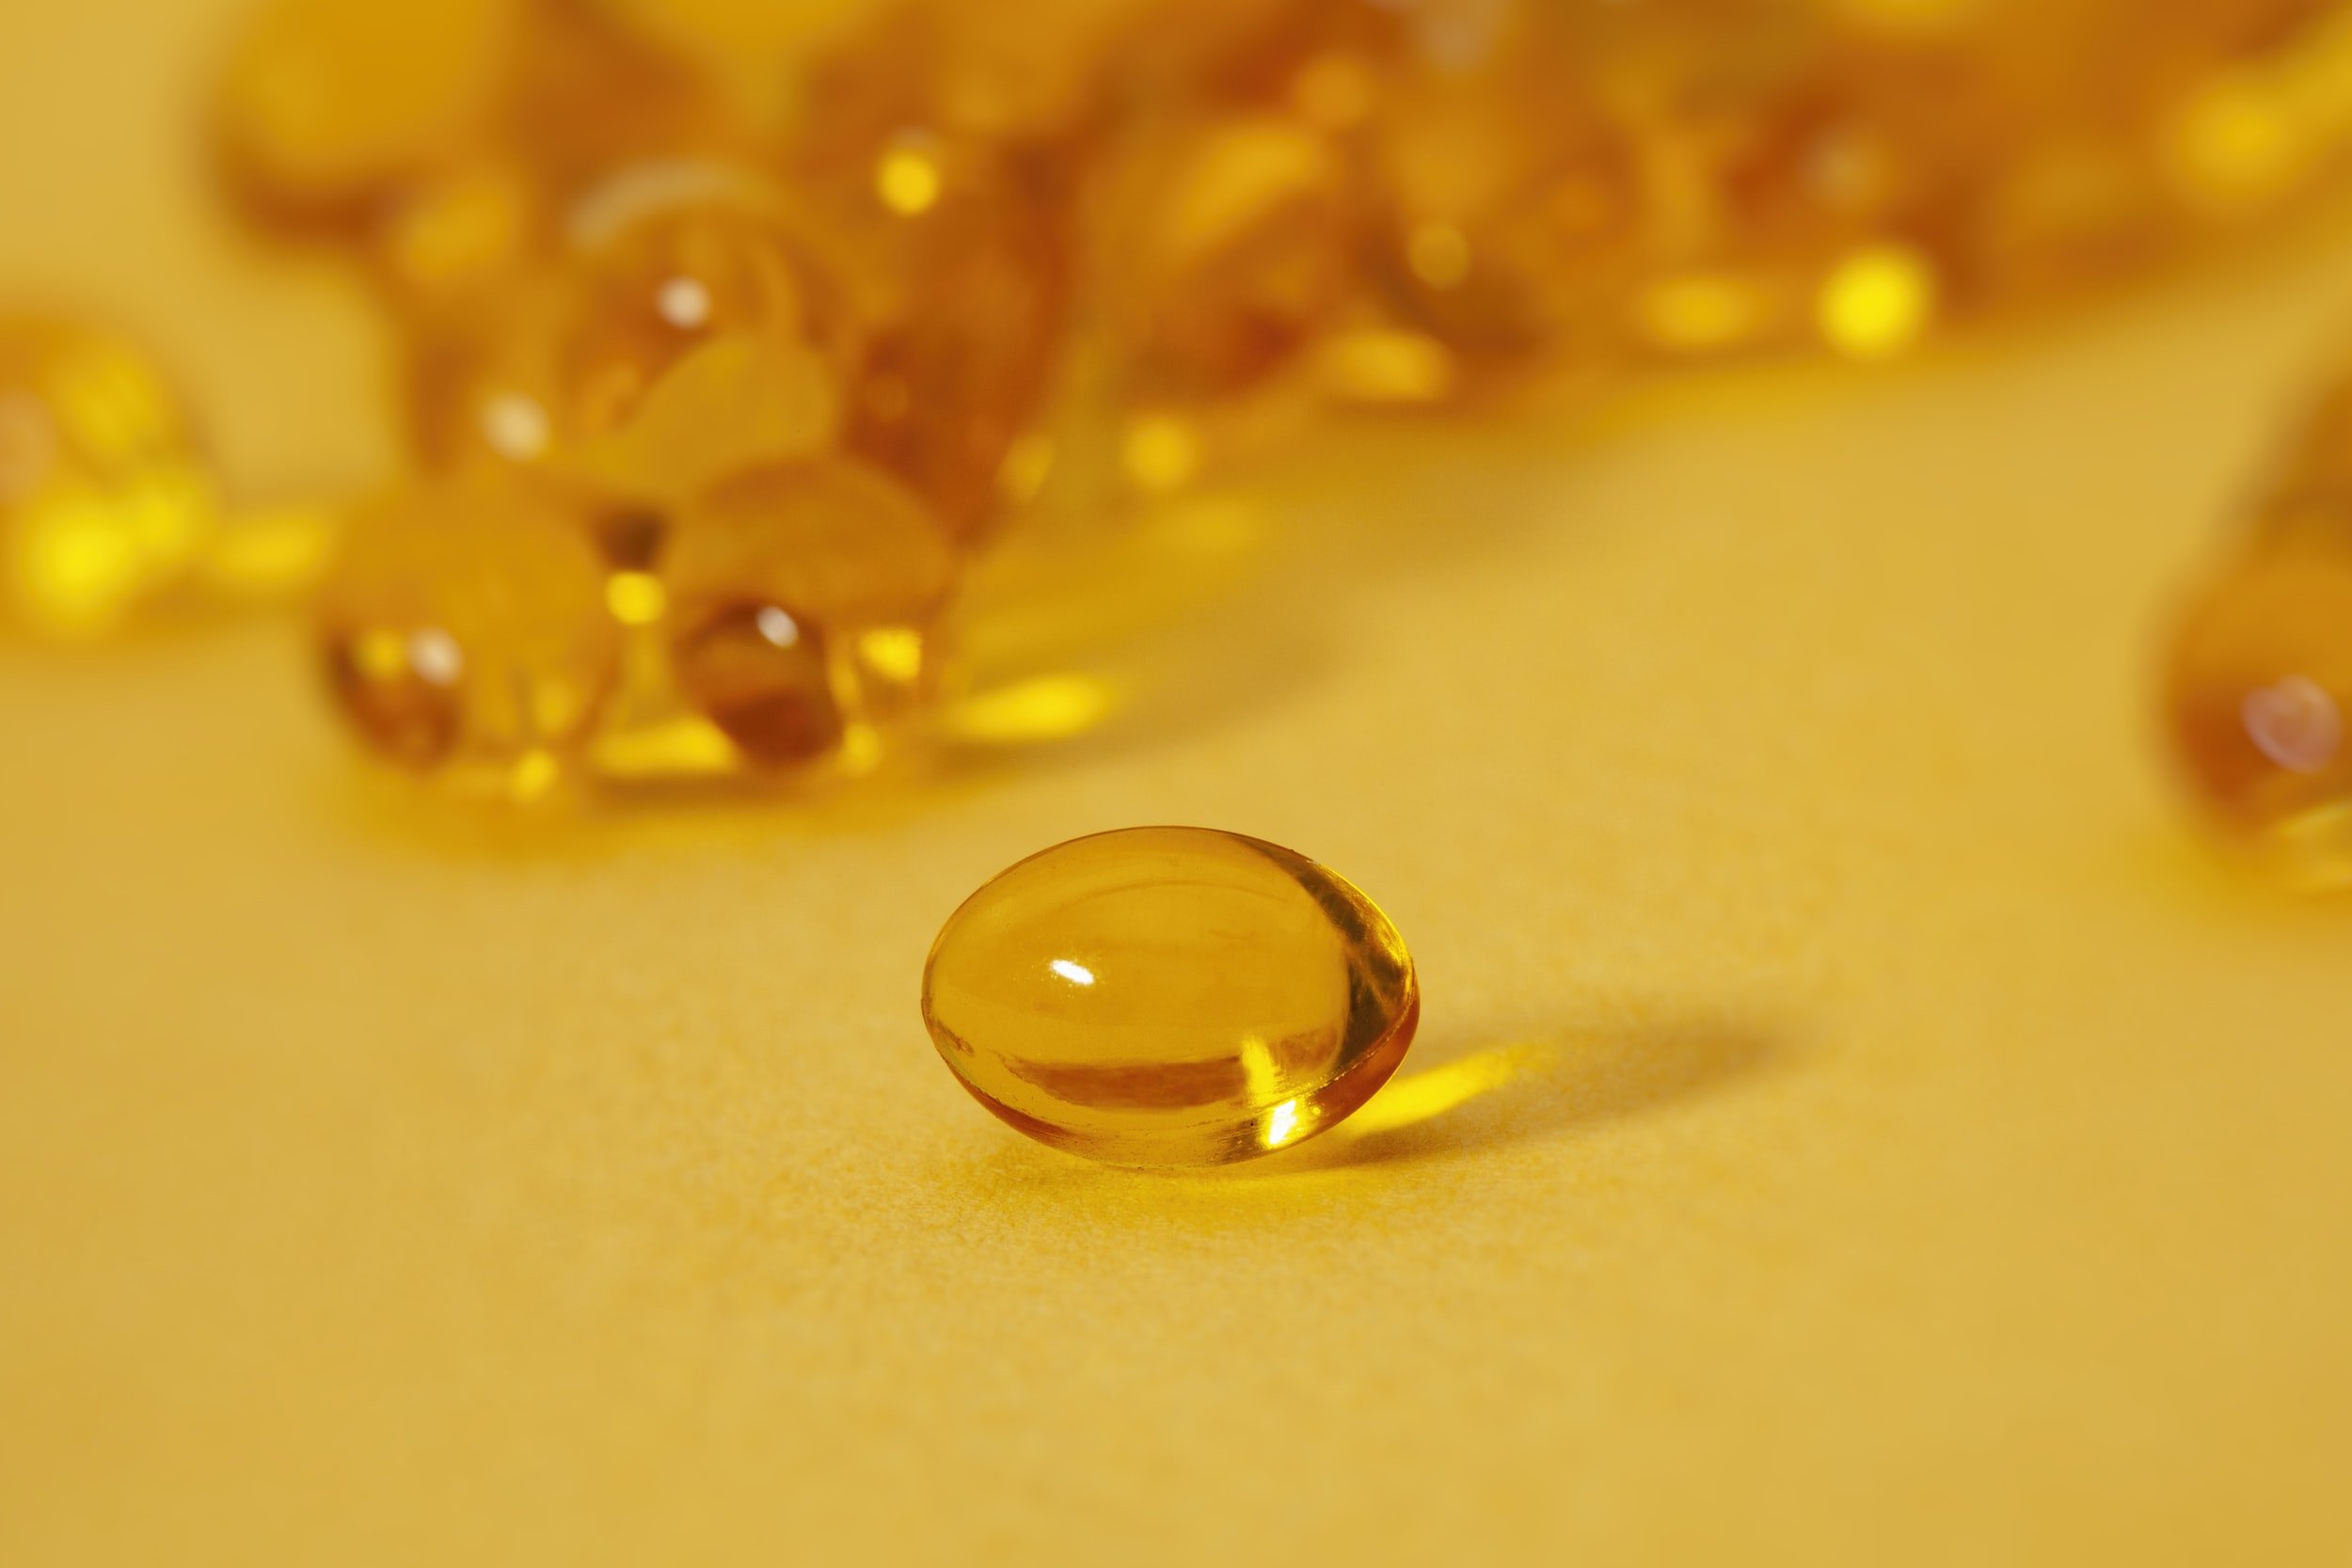 Vitamin D Supplementation Associated with 2.6 Year Extension of Life